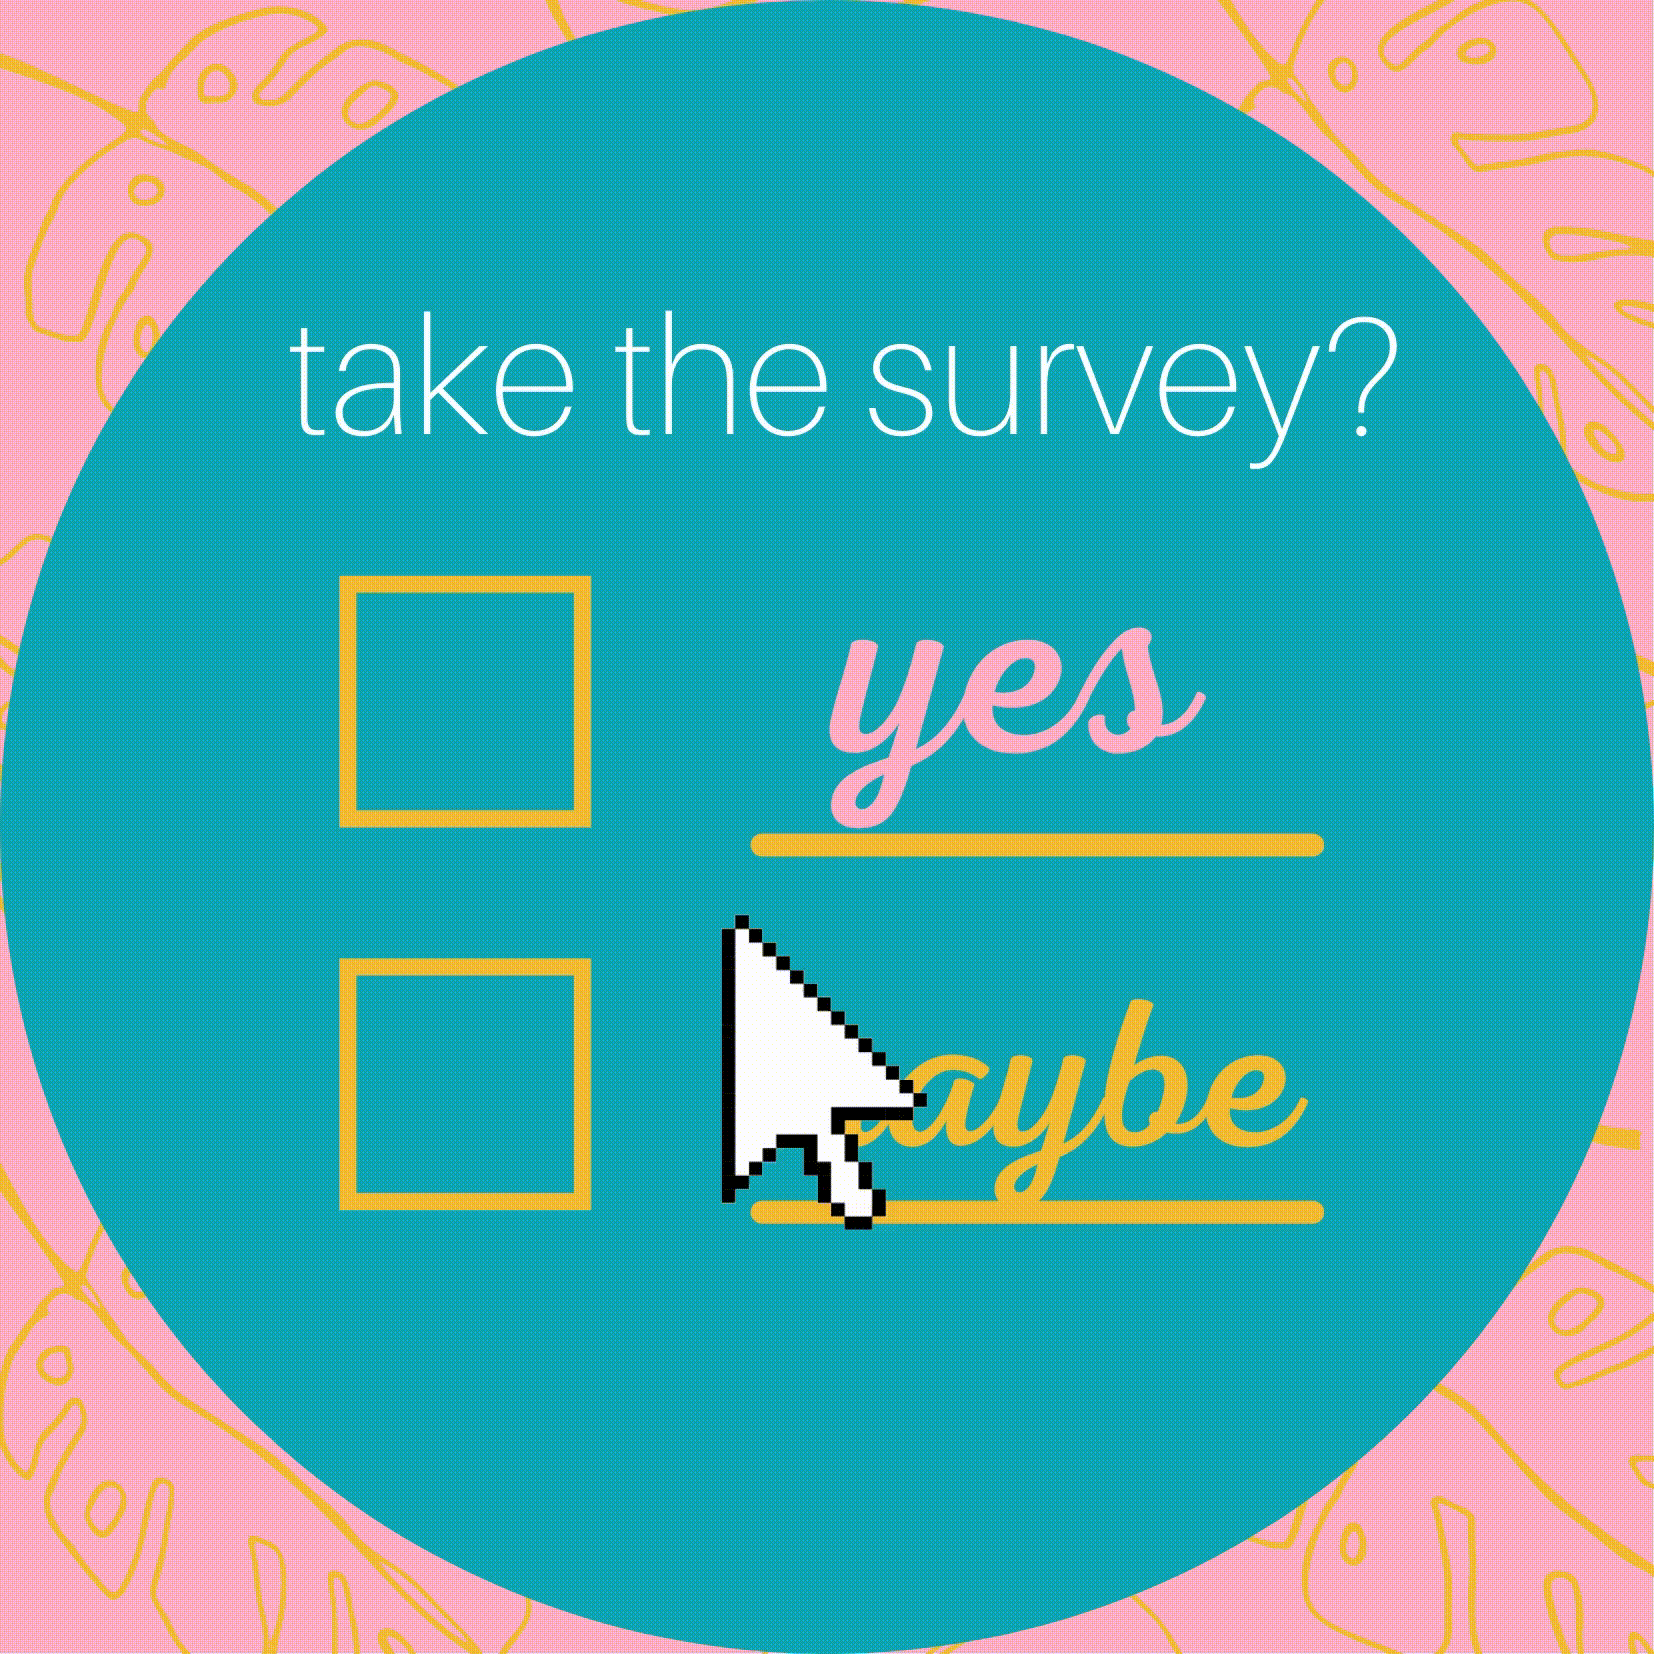 take-the-survey-yes-maybe-1